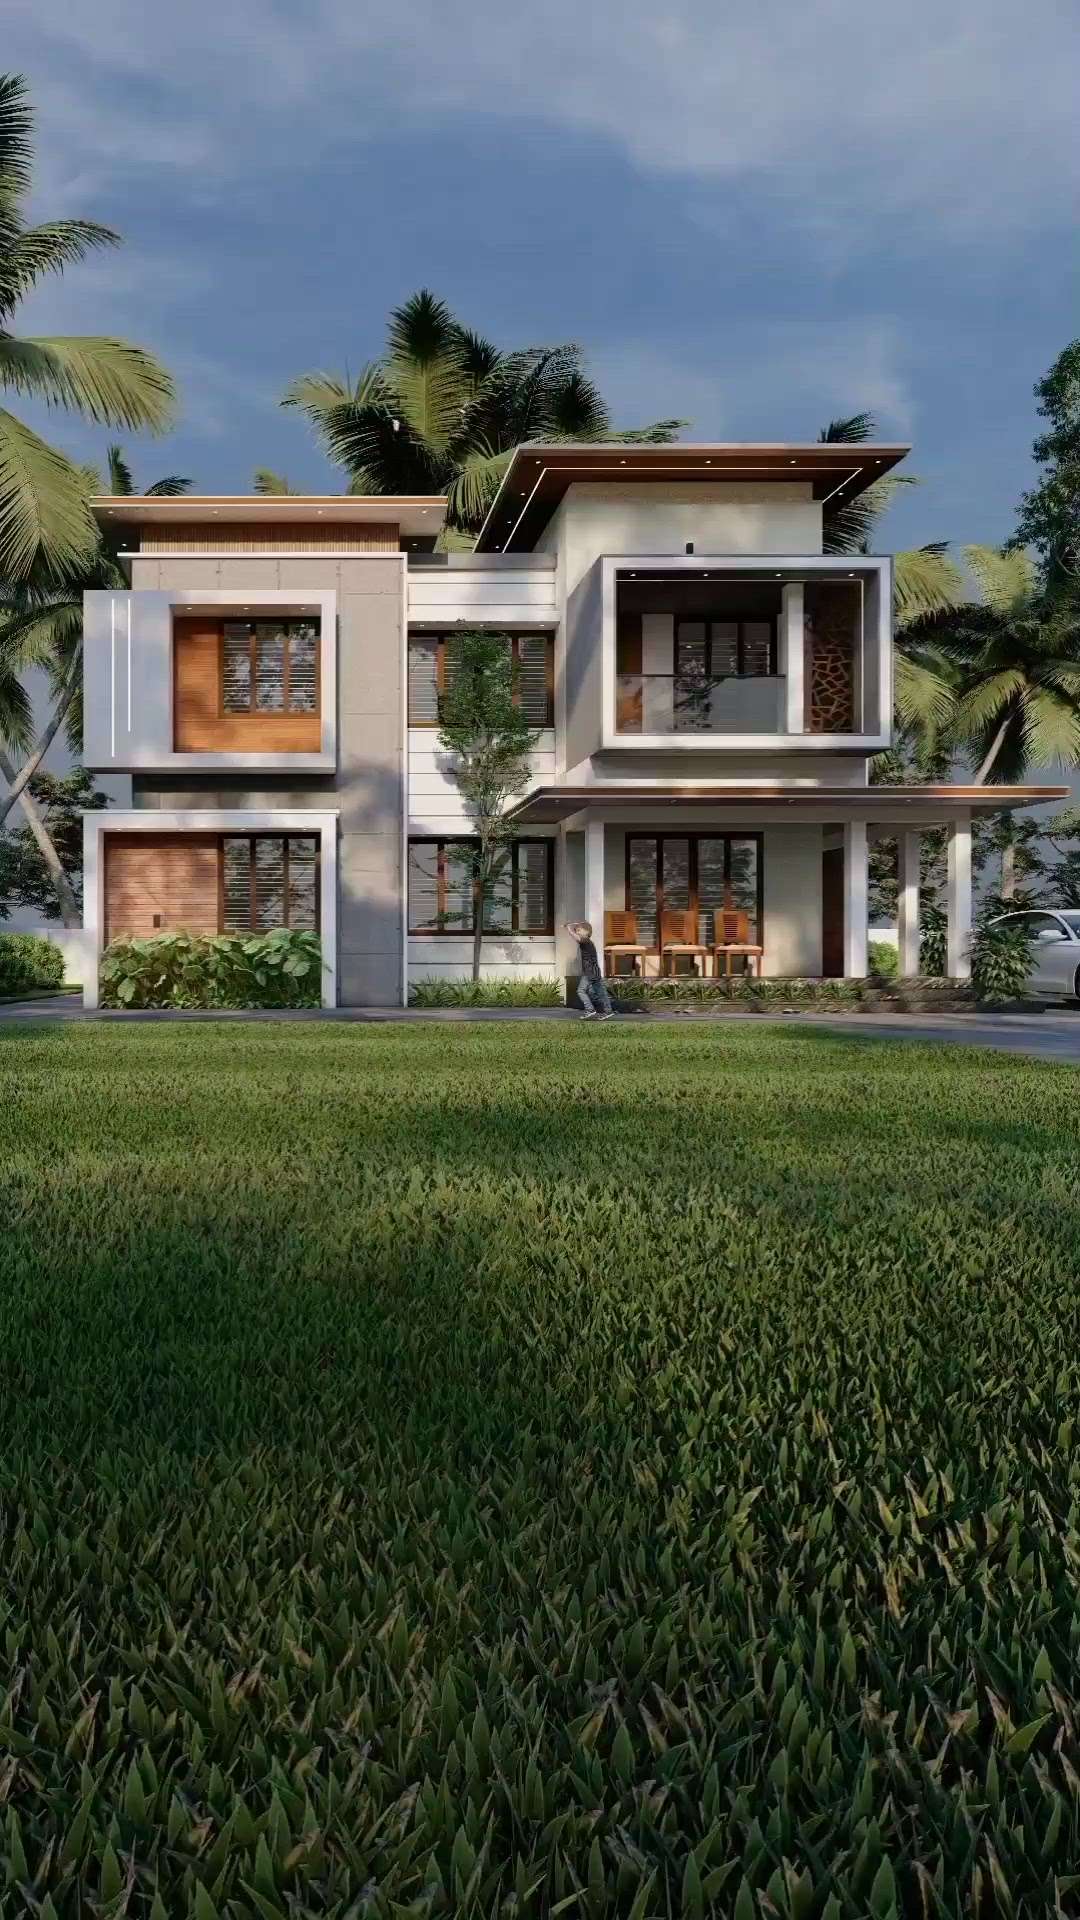 Contemporary Home Exterior 🏡 | 4BHK |Area : GF - 1101 sq.ft
Area : FF -  717  sq.ft
TOTAL : _ 1818 sq.ft |
Design: @sthaayi_design_lab 

Ground Floor 
● Sitout 
● Living 
● Dining 
● 1Master Bedroom attached 
● 2nd Bedroom attached 
● Kitchen 
● Work area 
● C-Toilet [out-door]
● Stair
● 3rd Bedroom attached
● 4th Bedroom attached 
● Upper Living
● Balcony 
.
.
.
#sthaayi_design_lab #sthaayi 
#floorplan | #architecture | #architecturaldesign | #housedesign | #buildingdesign | #designhouse | #designerhouse | #interiordesign | #construction | #newconstruction | #civilengineering | #realestate #kerala #budgethome #keralahomes